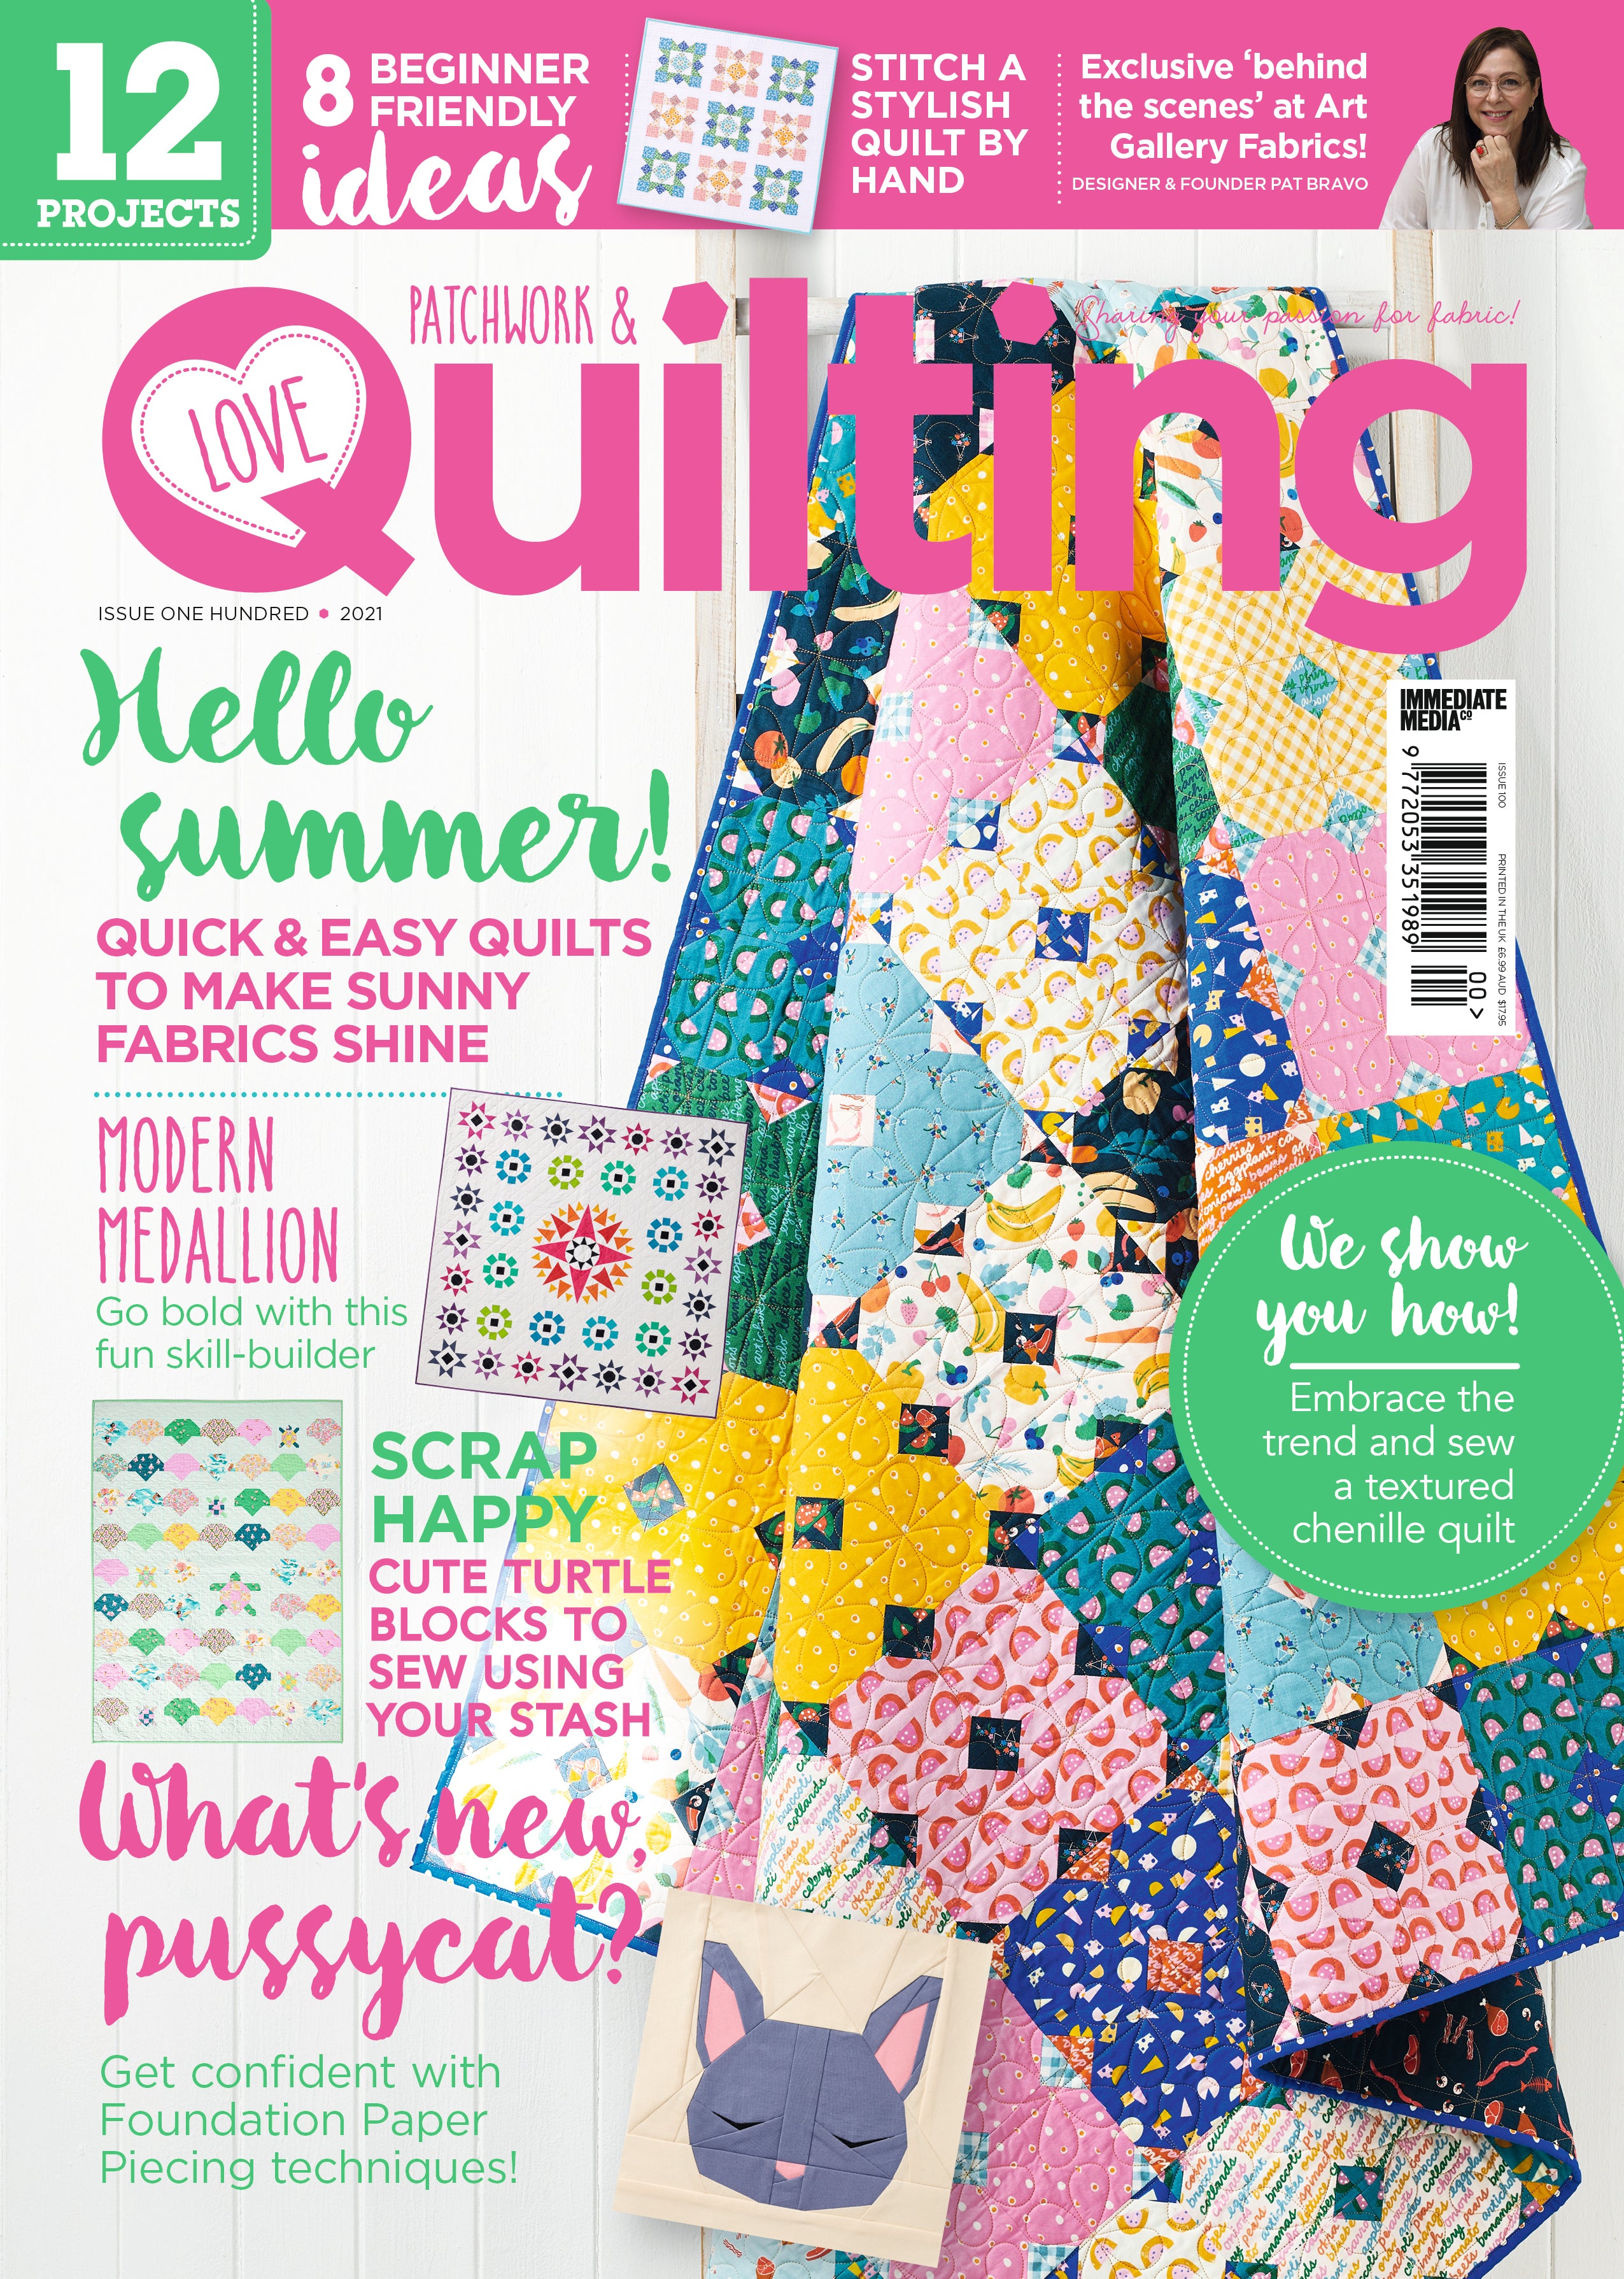 Love Patchwork and Quilting Magazine issue 100 cover featuring The Weekend Quilter Wendy Chow Fresh Pickings Quilt and Picnic Tote Bag Project